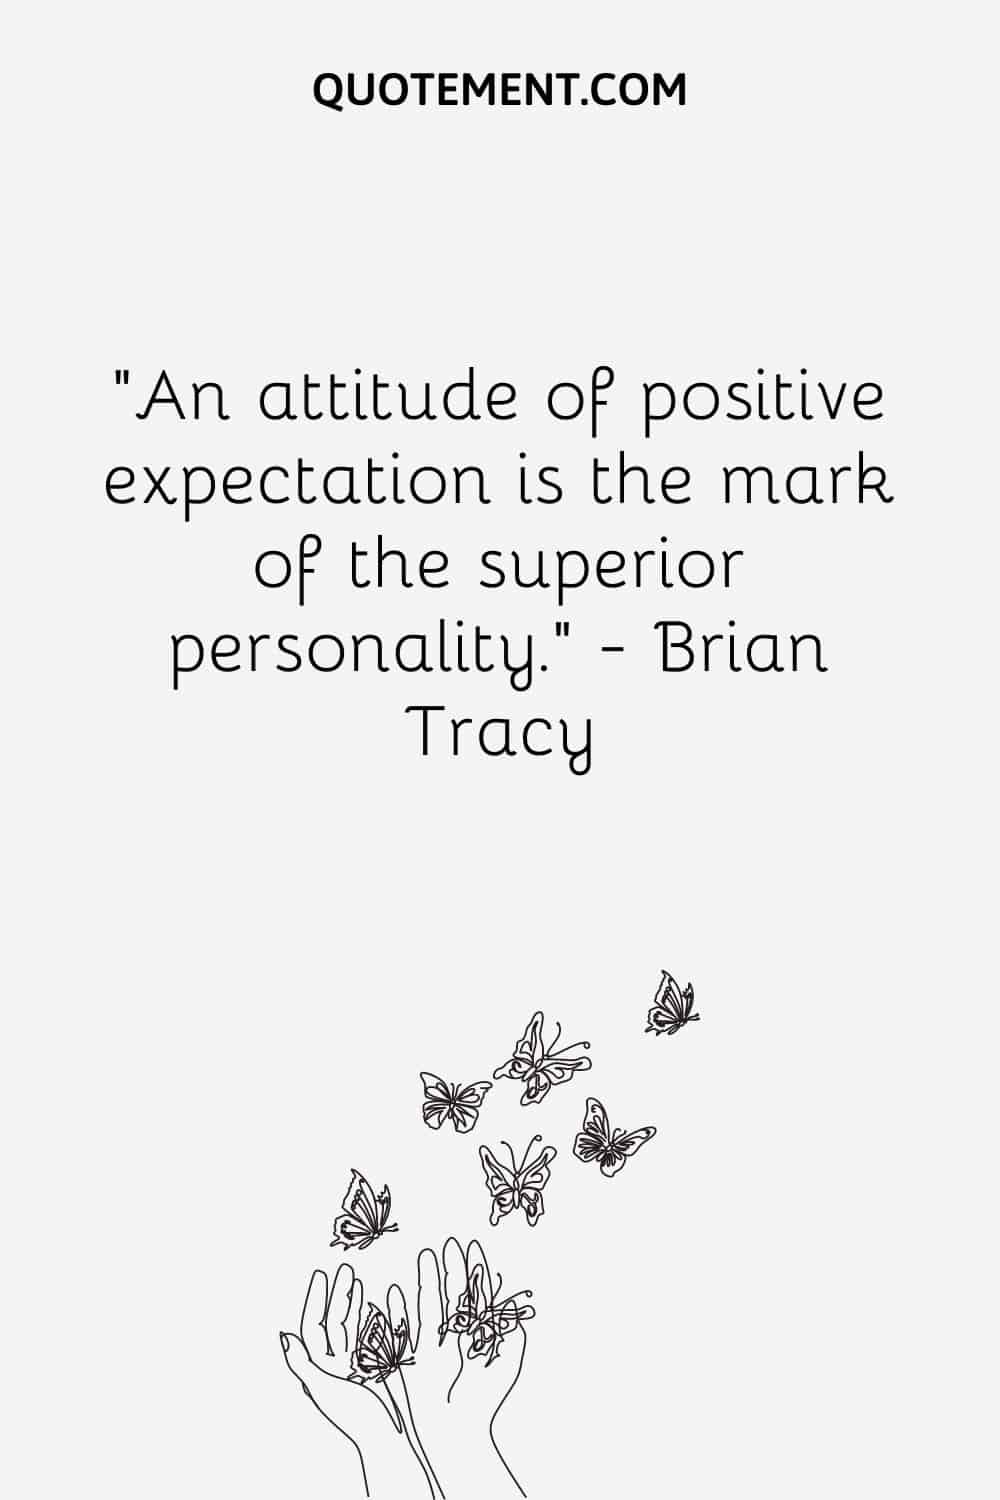 An attitude of positive expectation is the mark of the superior personality